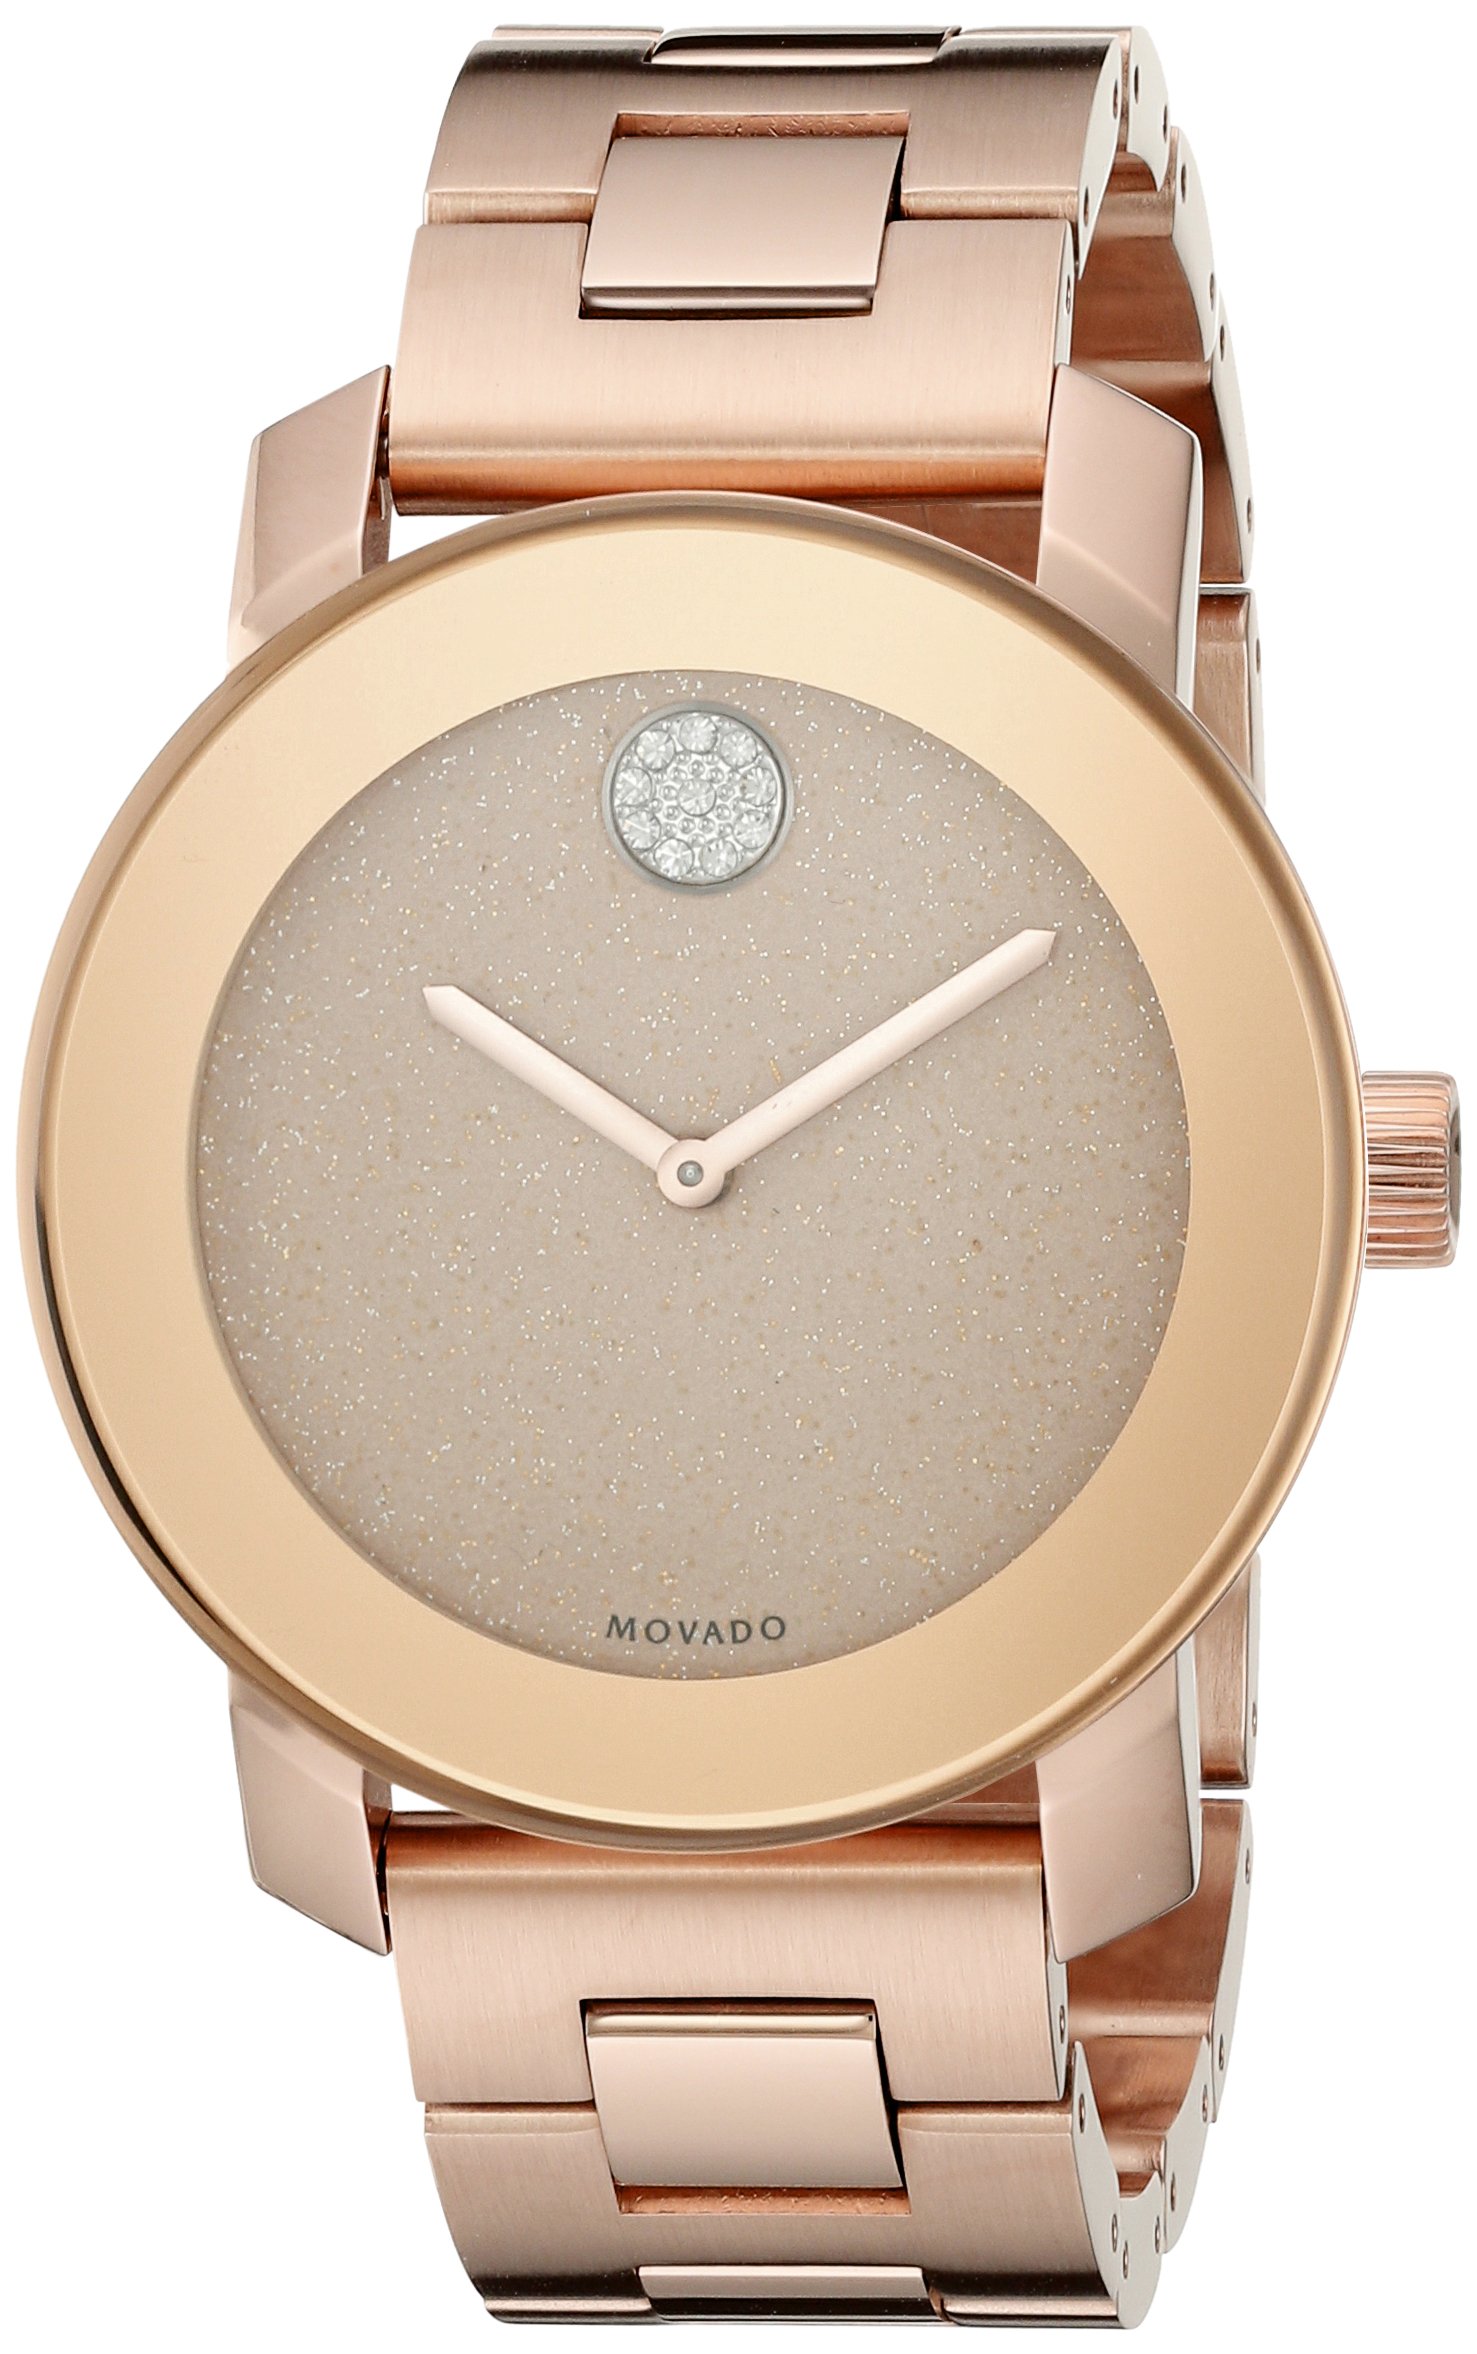 Movado Women's 3600335 Crystal-Accented Rose Gold-Tone Stainless Steel Watch